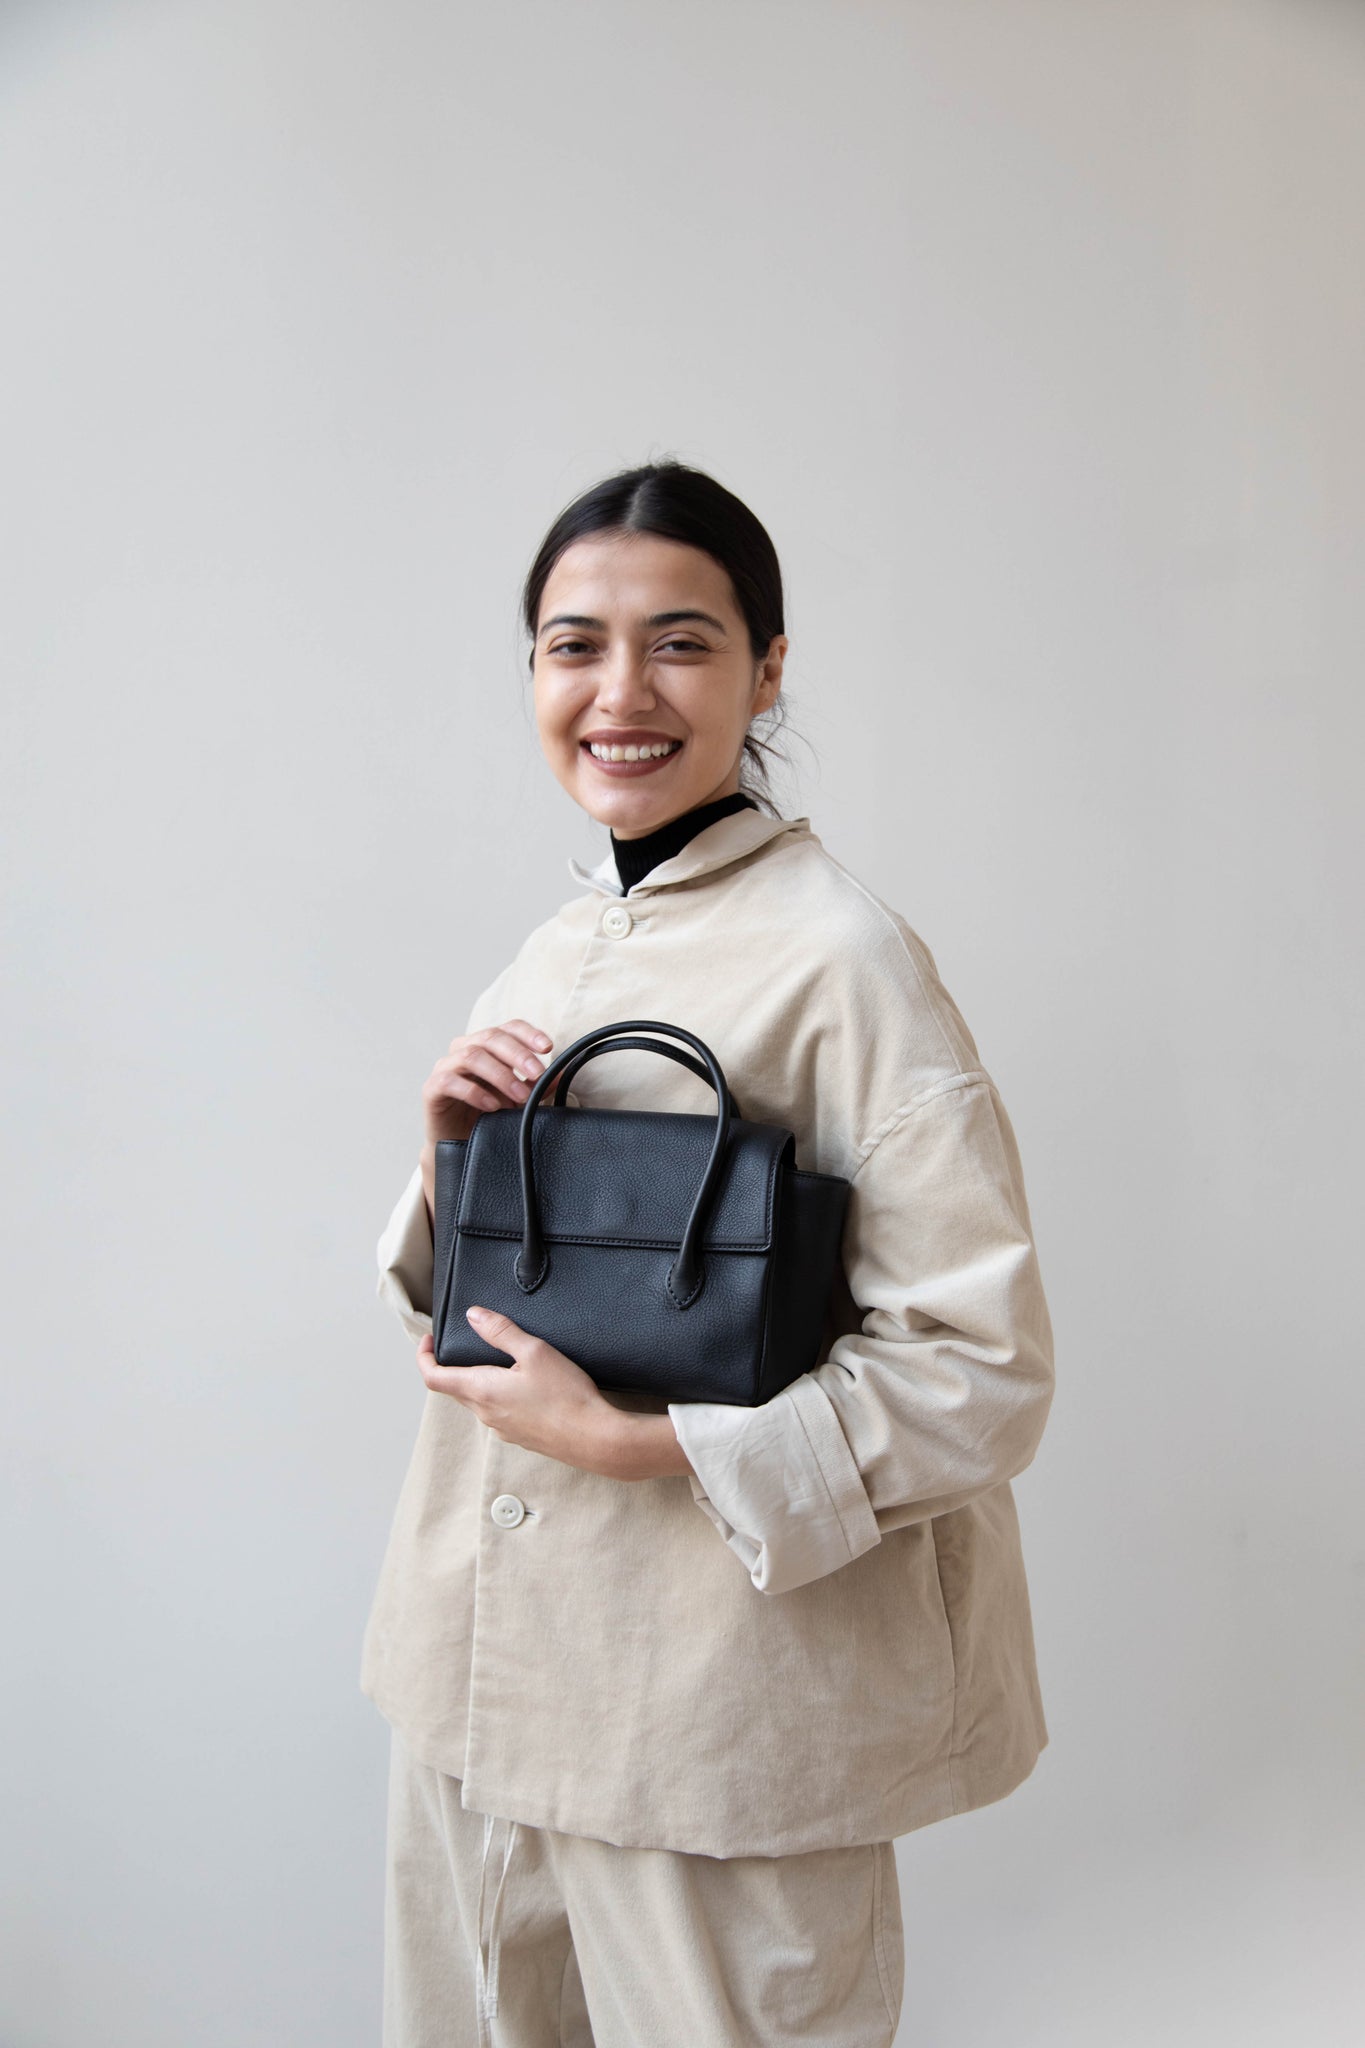 How to Wear the Jacquemus Mini Bag - THE FASHION HOUSE MOM